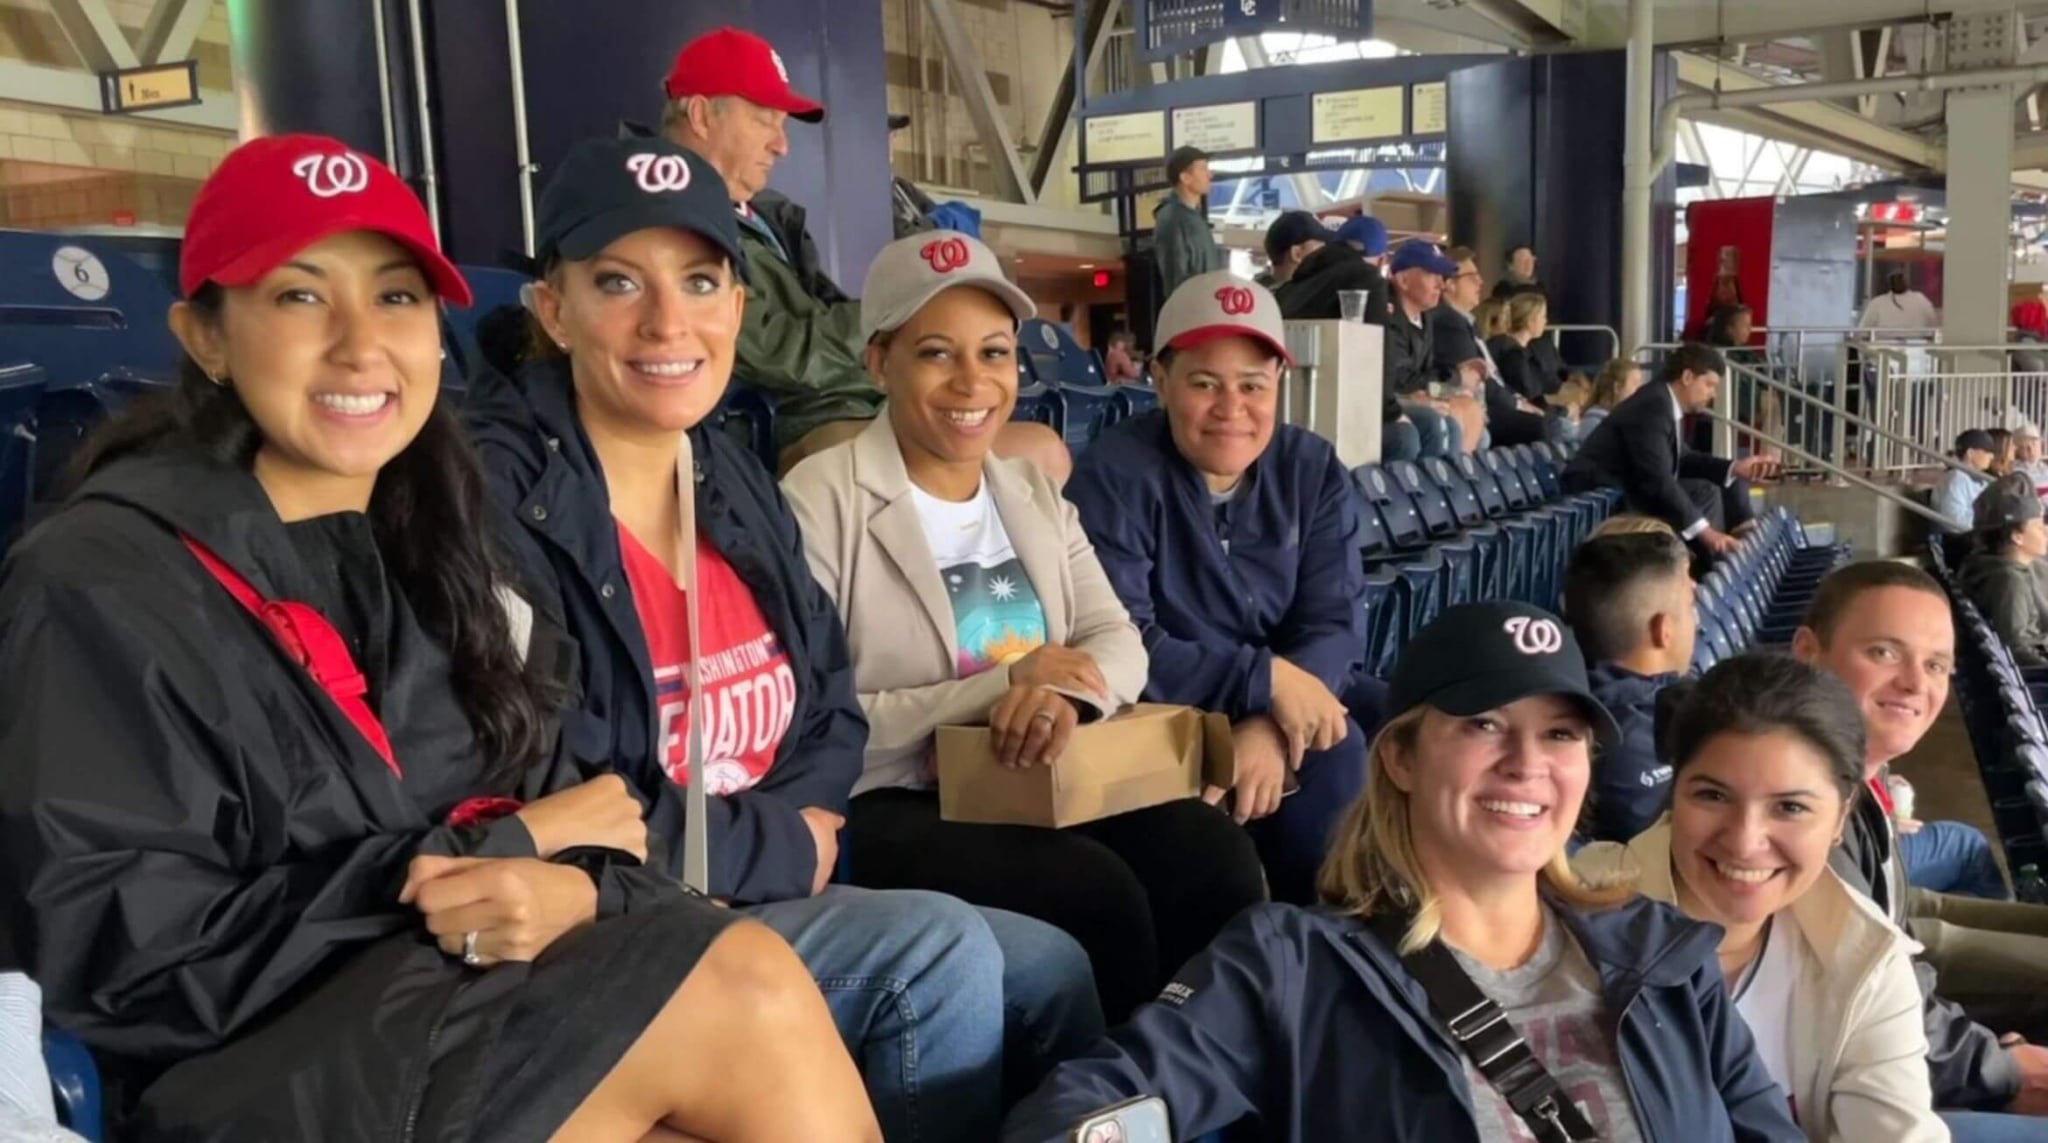 TST employees at a baseball game in Washington DC